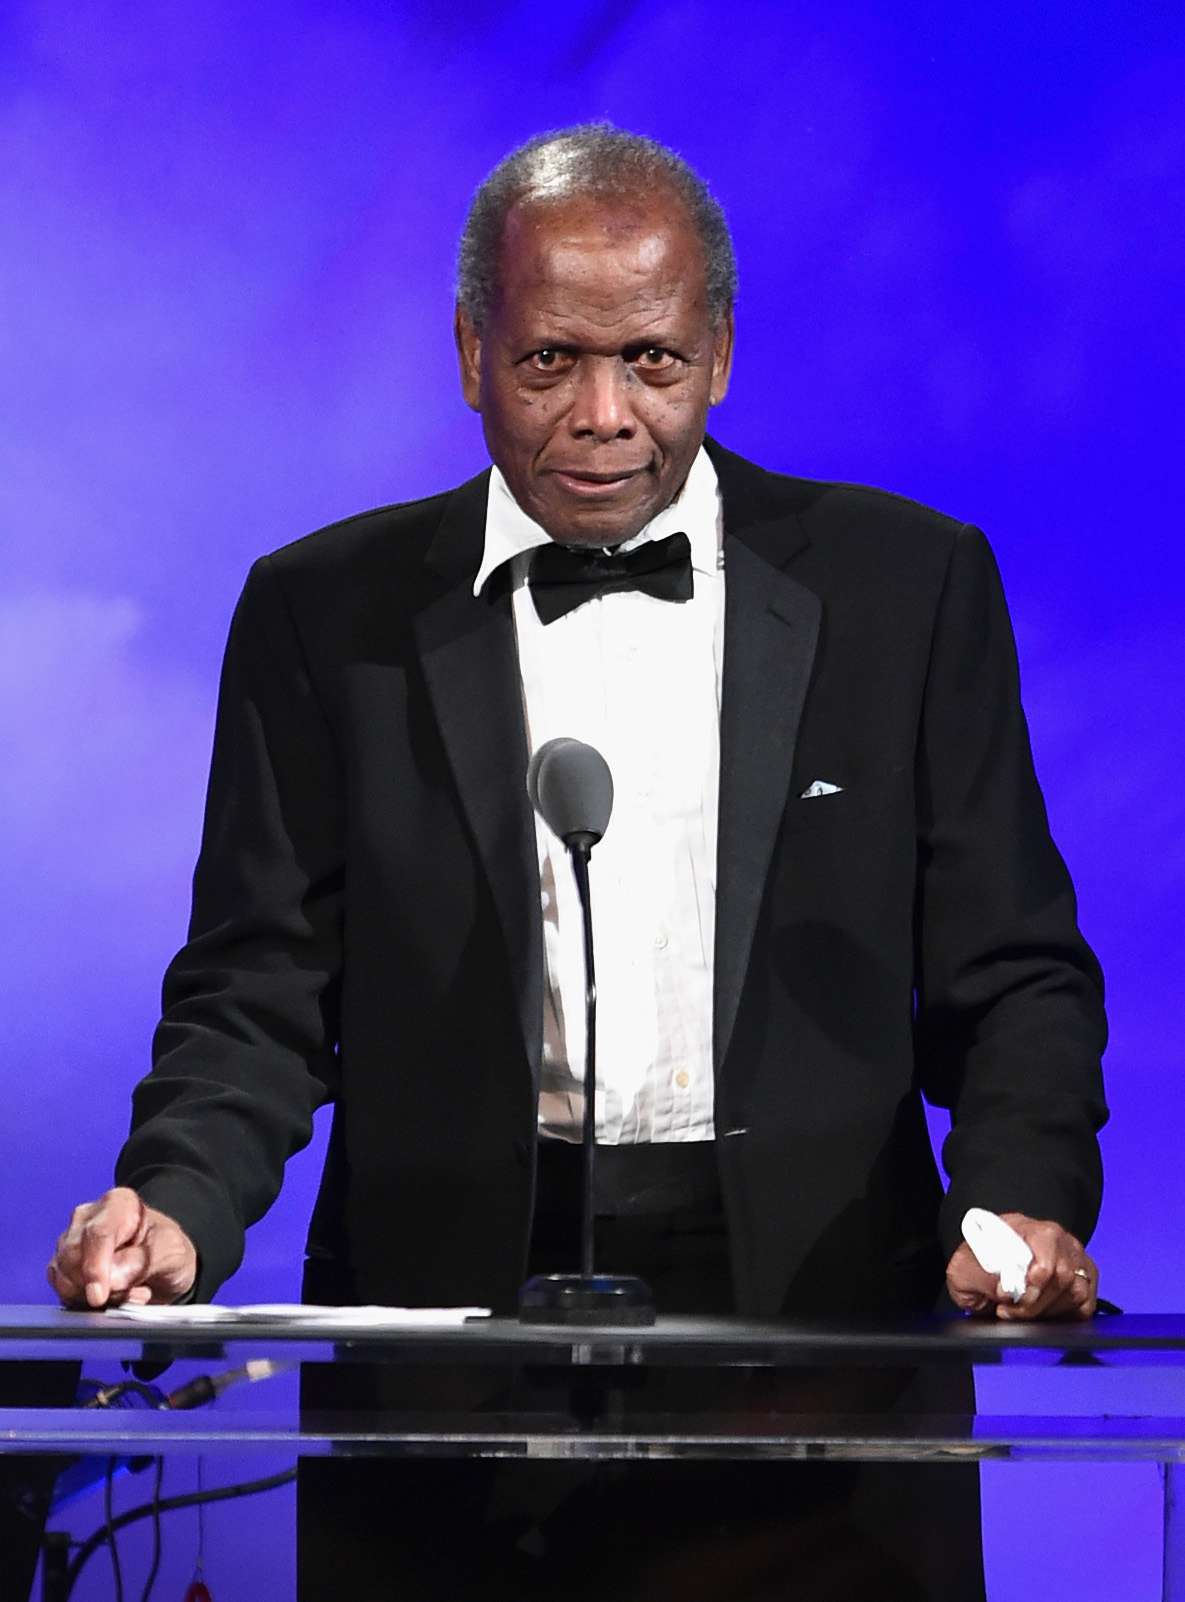 BEVERLY HILLS, CA - OCTOBER 08: Inspirational Lifetime Achievement Award Recipient Sidney Poitier speaks onstage during the 2016 Carousel Of Hope Ball at The Beverly Hilton Hotel on October 8, 2016 in Beverly Hills, California. (Photo by Alberto E. Rodriguez/Getty Images)